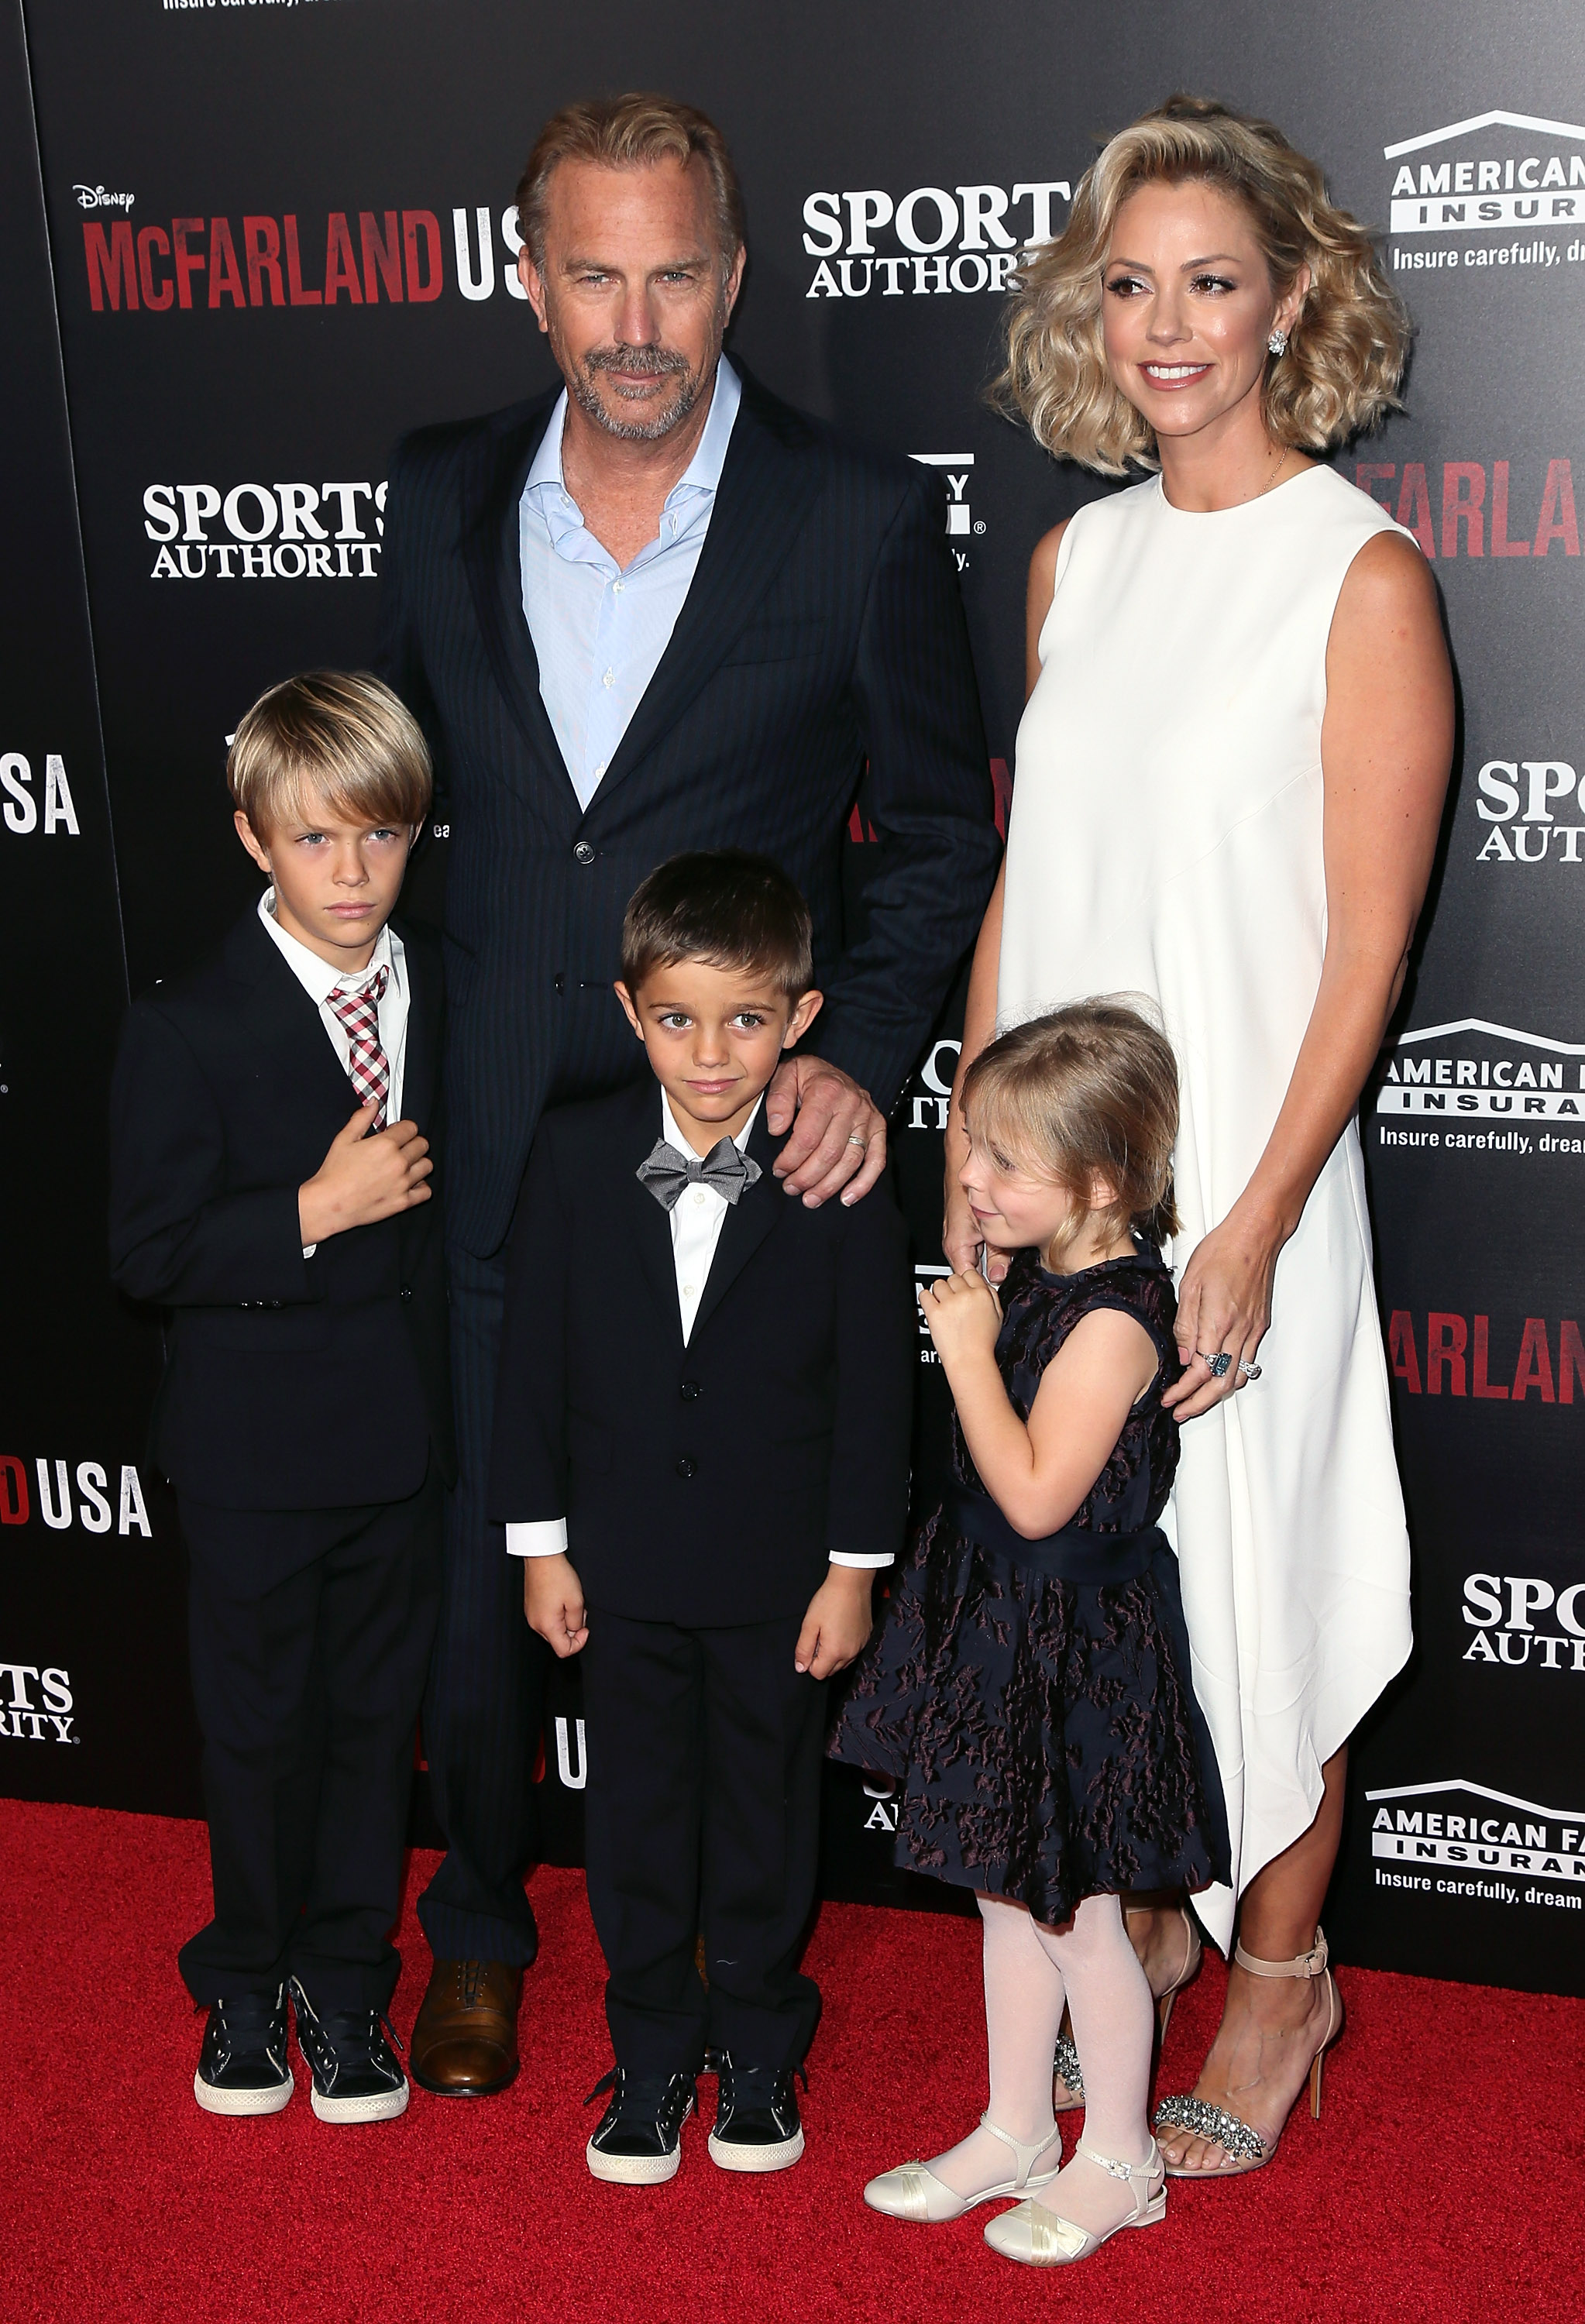 Cayden, Kevin, Hayes, and Grace Costner with Christine Baumgartner at the premiere for "McFarland, USA" in Hollywood, 2015 | Source: Getty Images